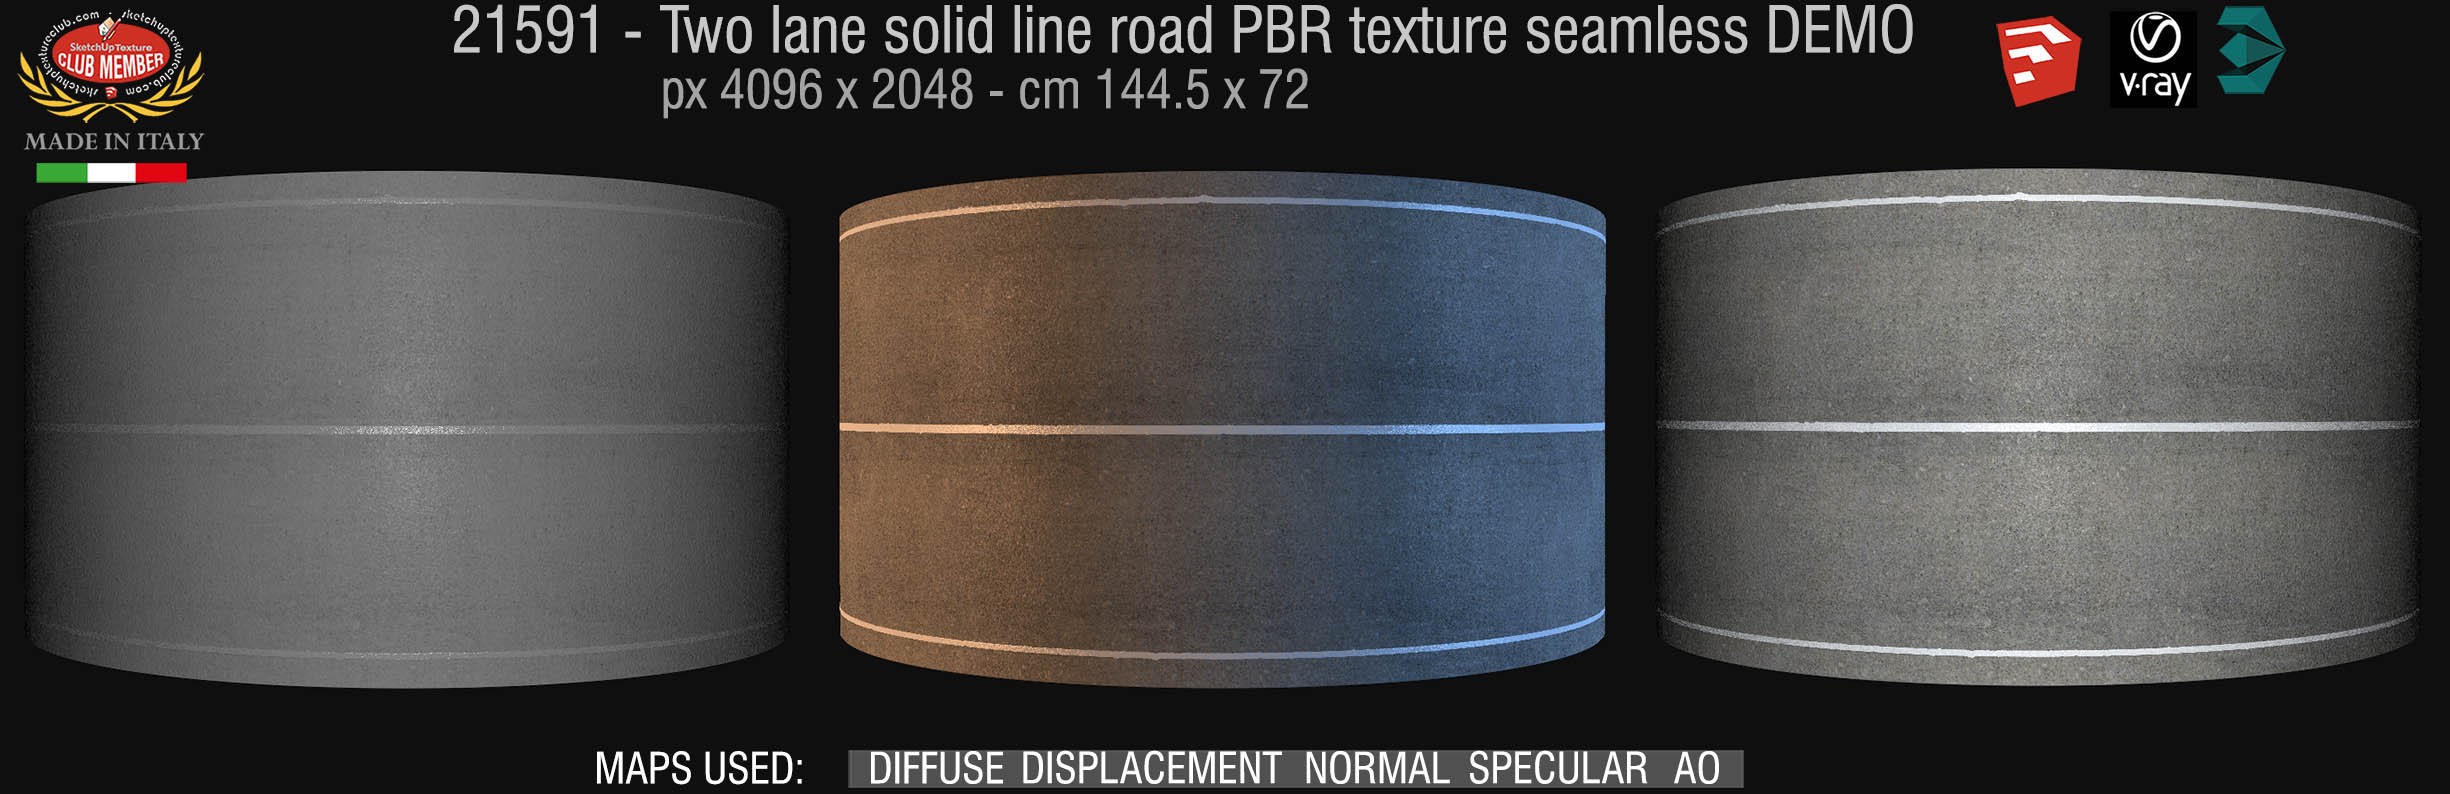 21592 two lane solid line road clean PBR texture seamless DEMO